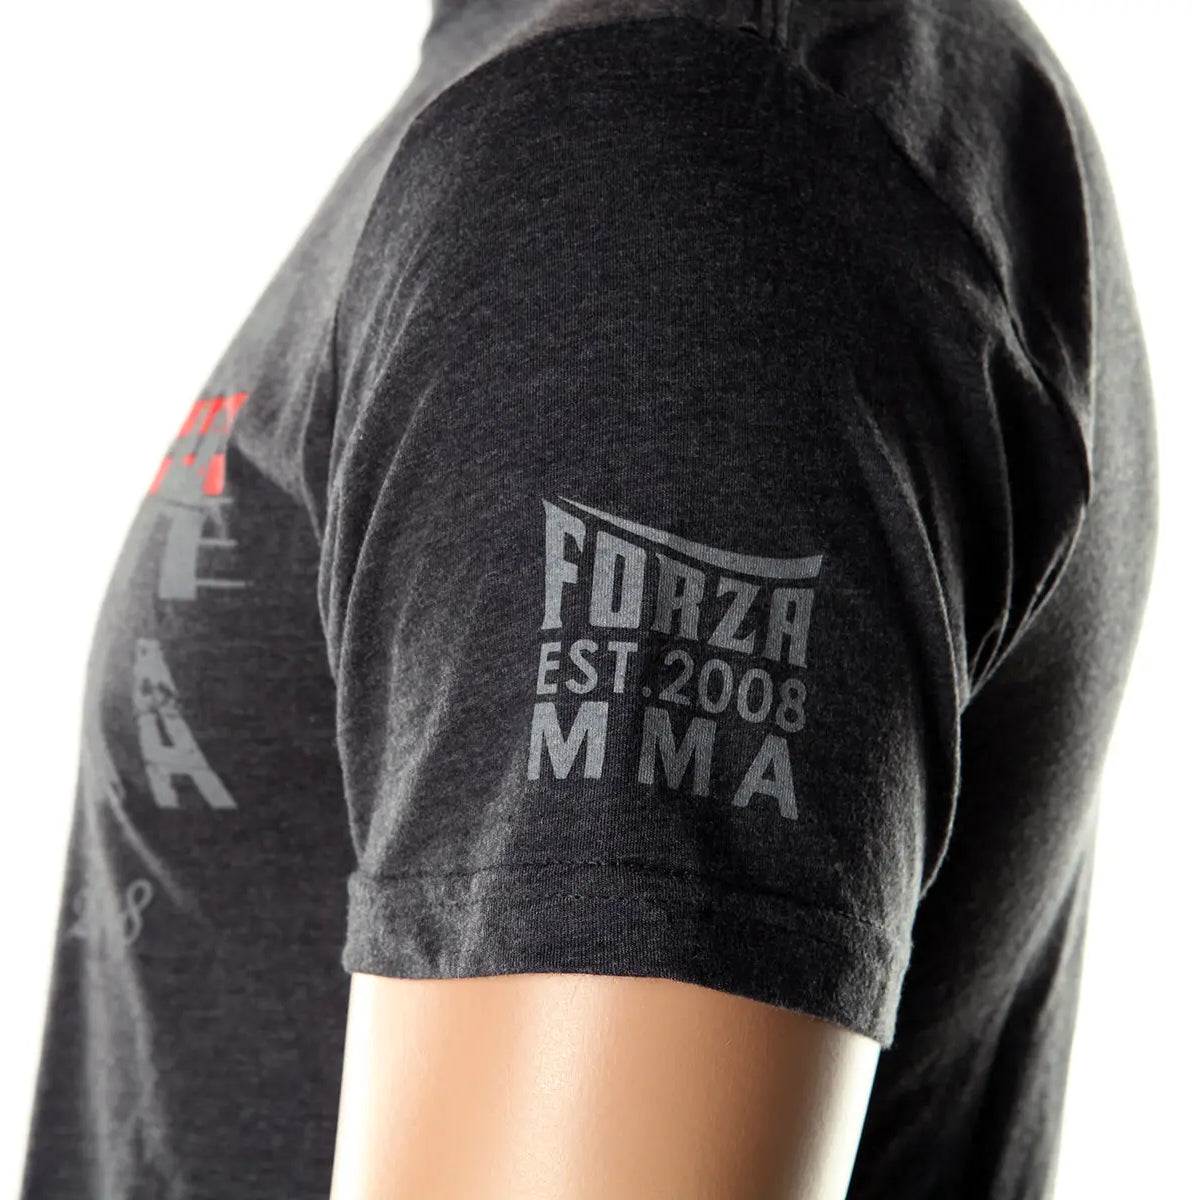 Forza Sports "New Heights" MMA T-Shirt - Charcoal Forza Sports